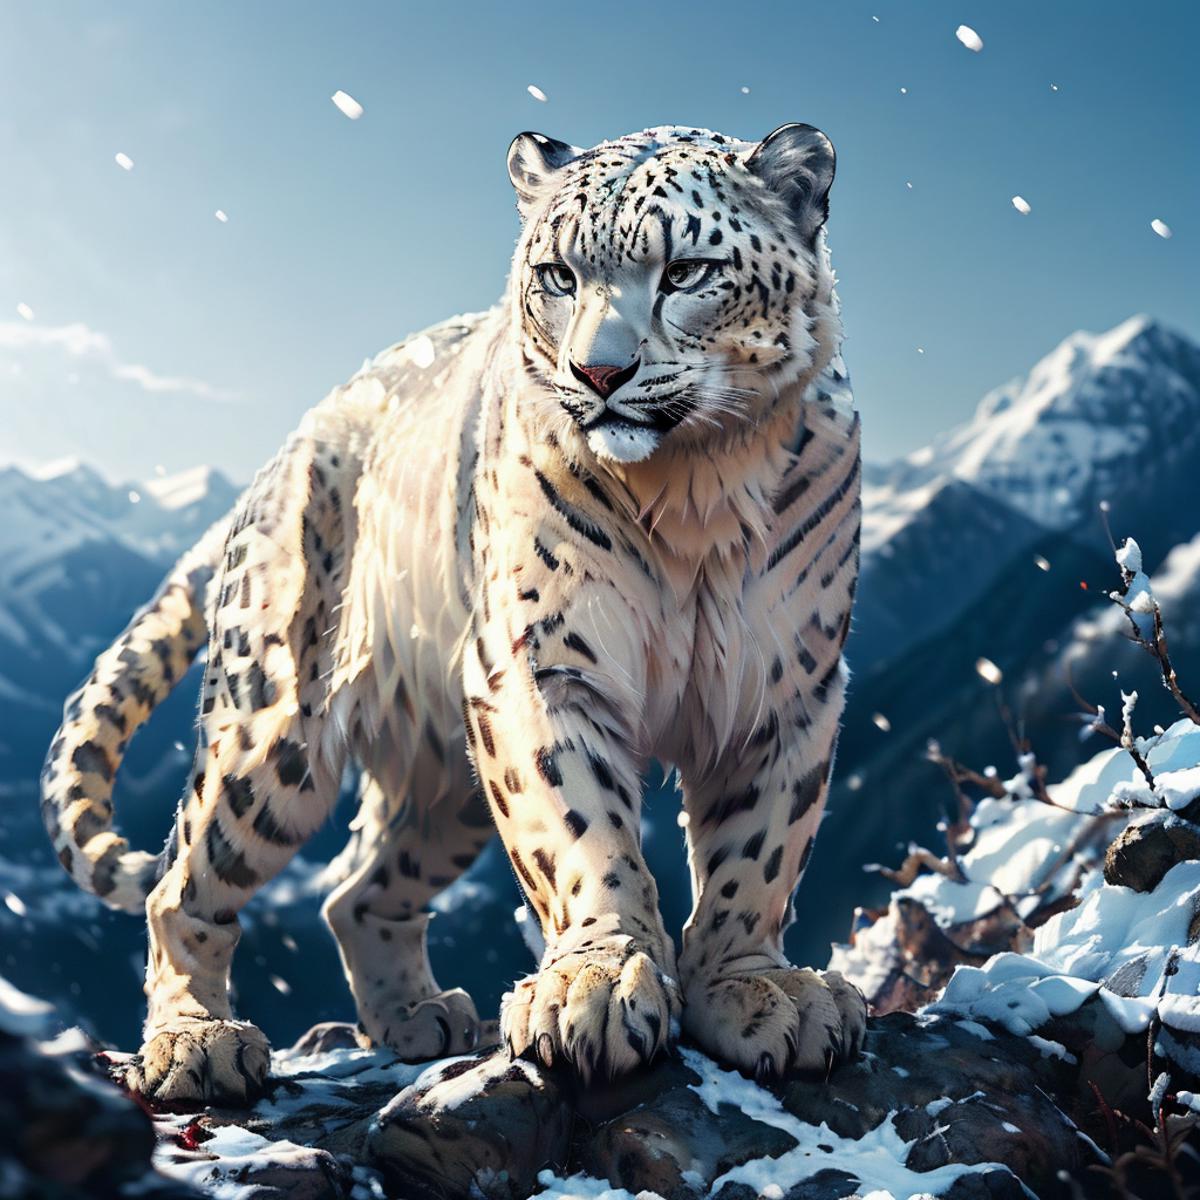 RPGSnowLeopard image by ashrpg